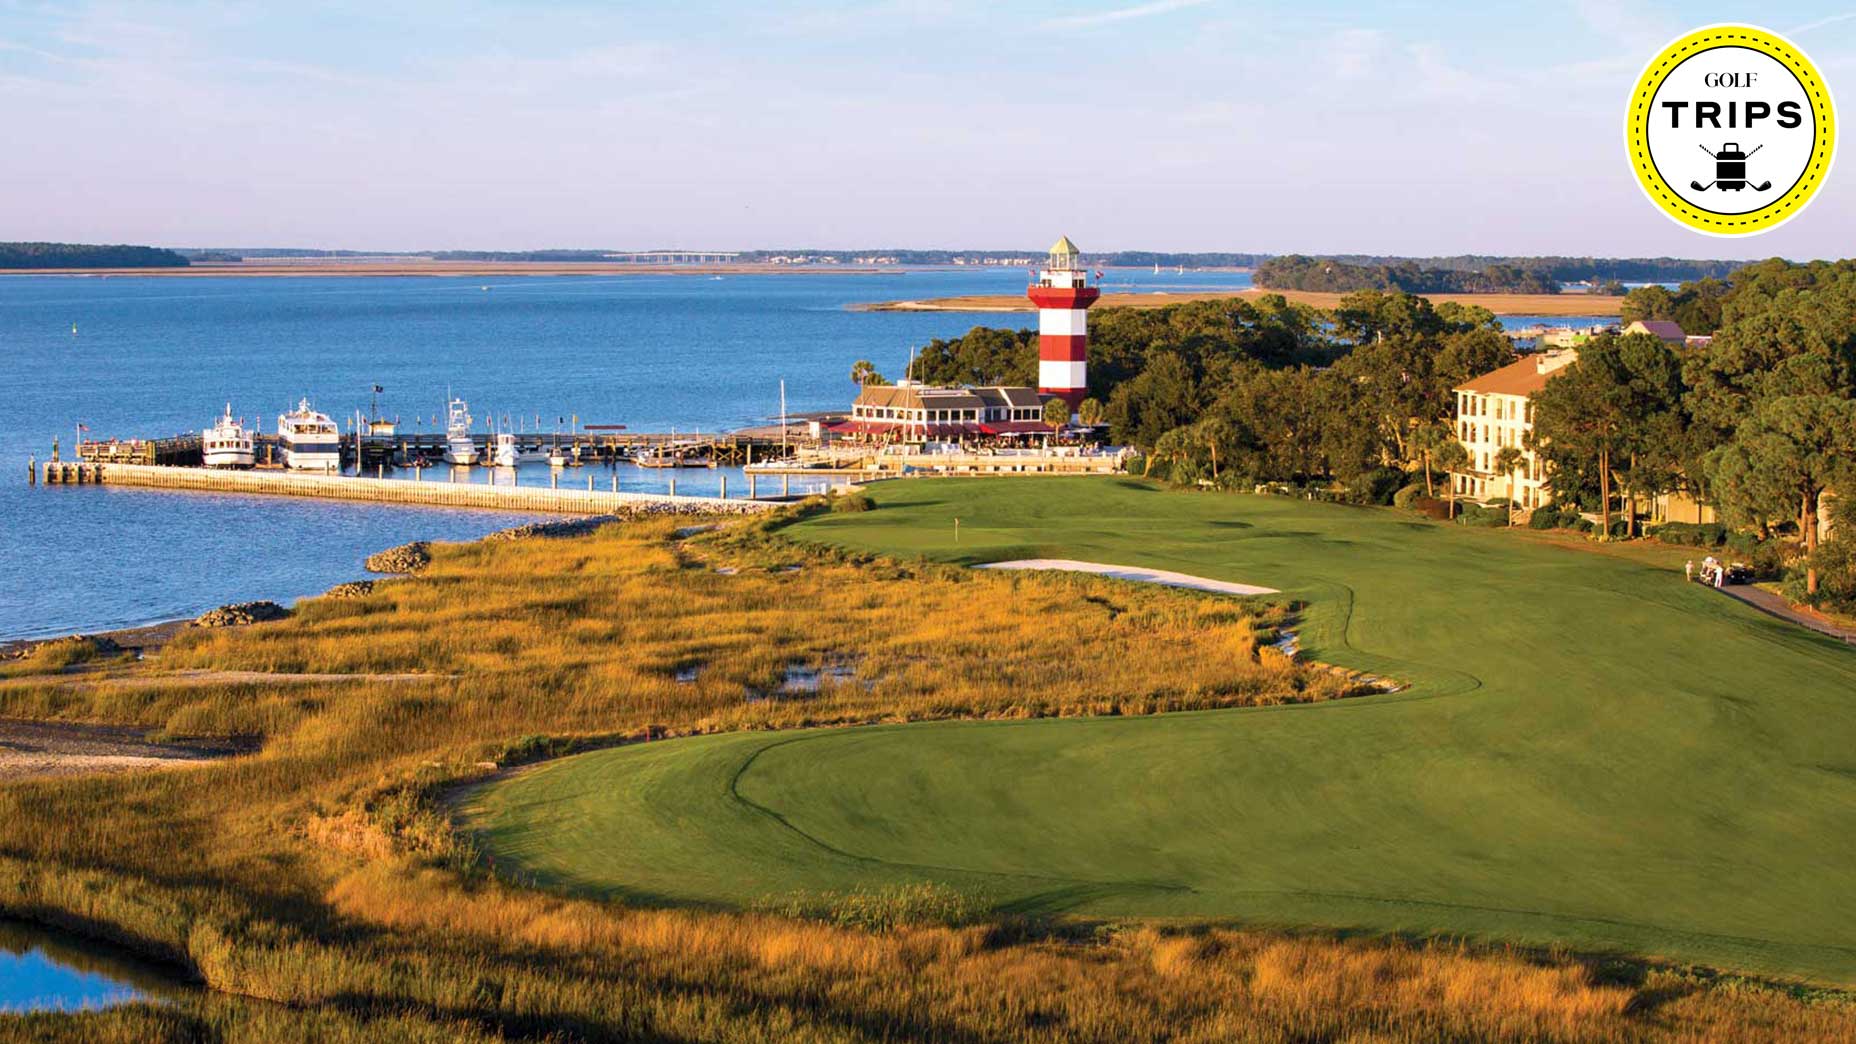 The 18th hole at harbour town golf links